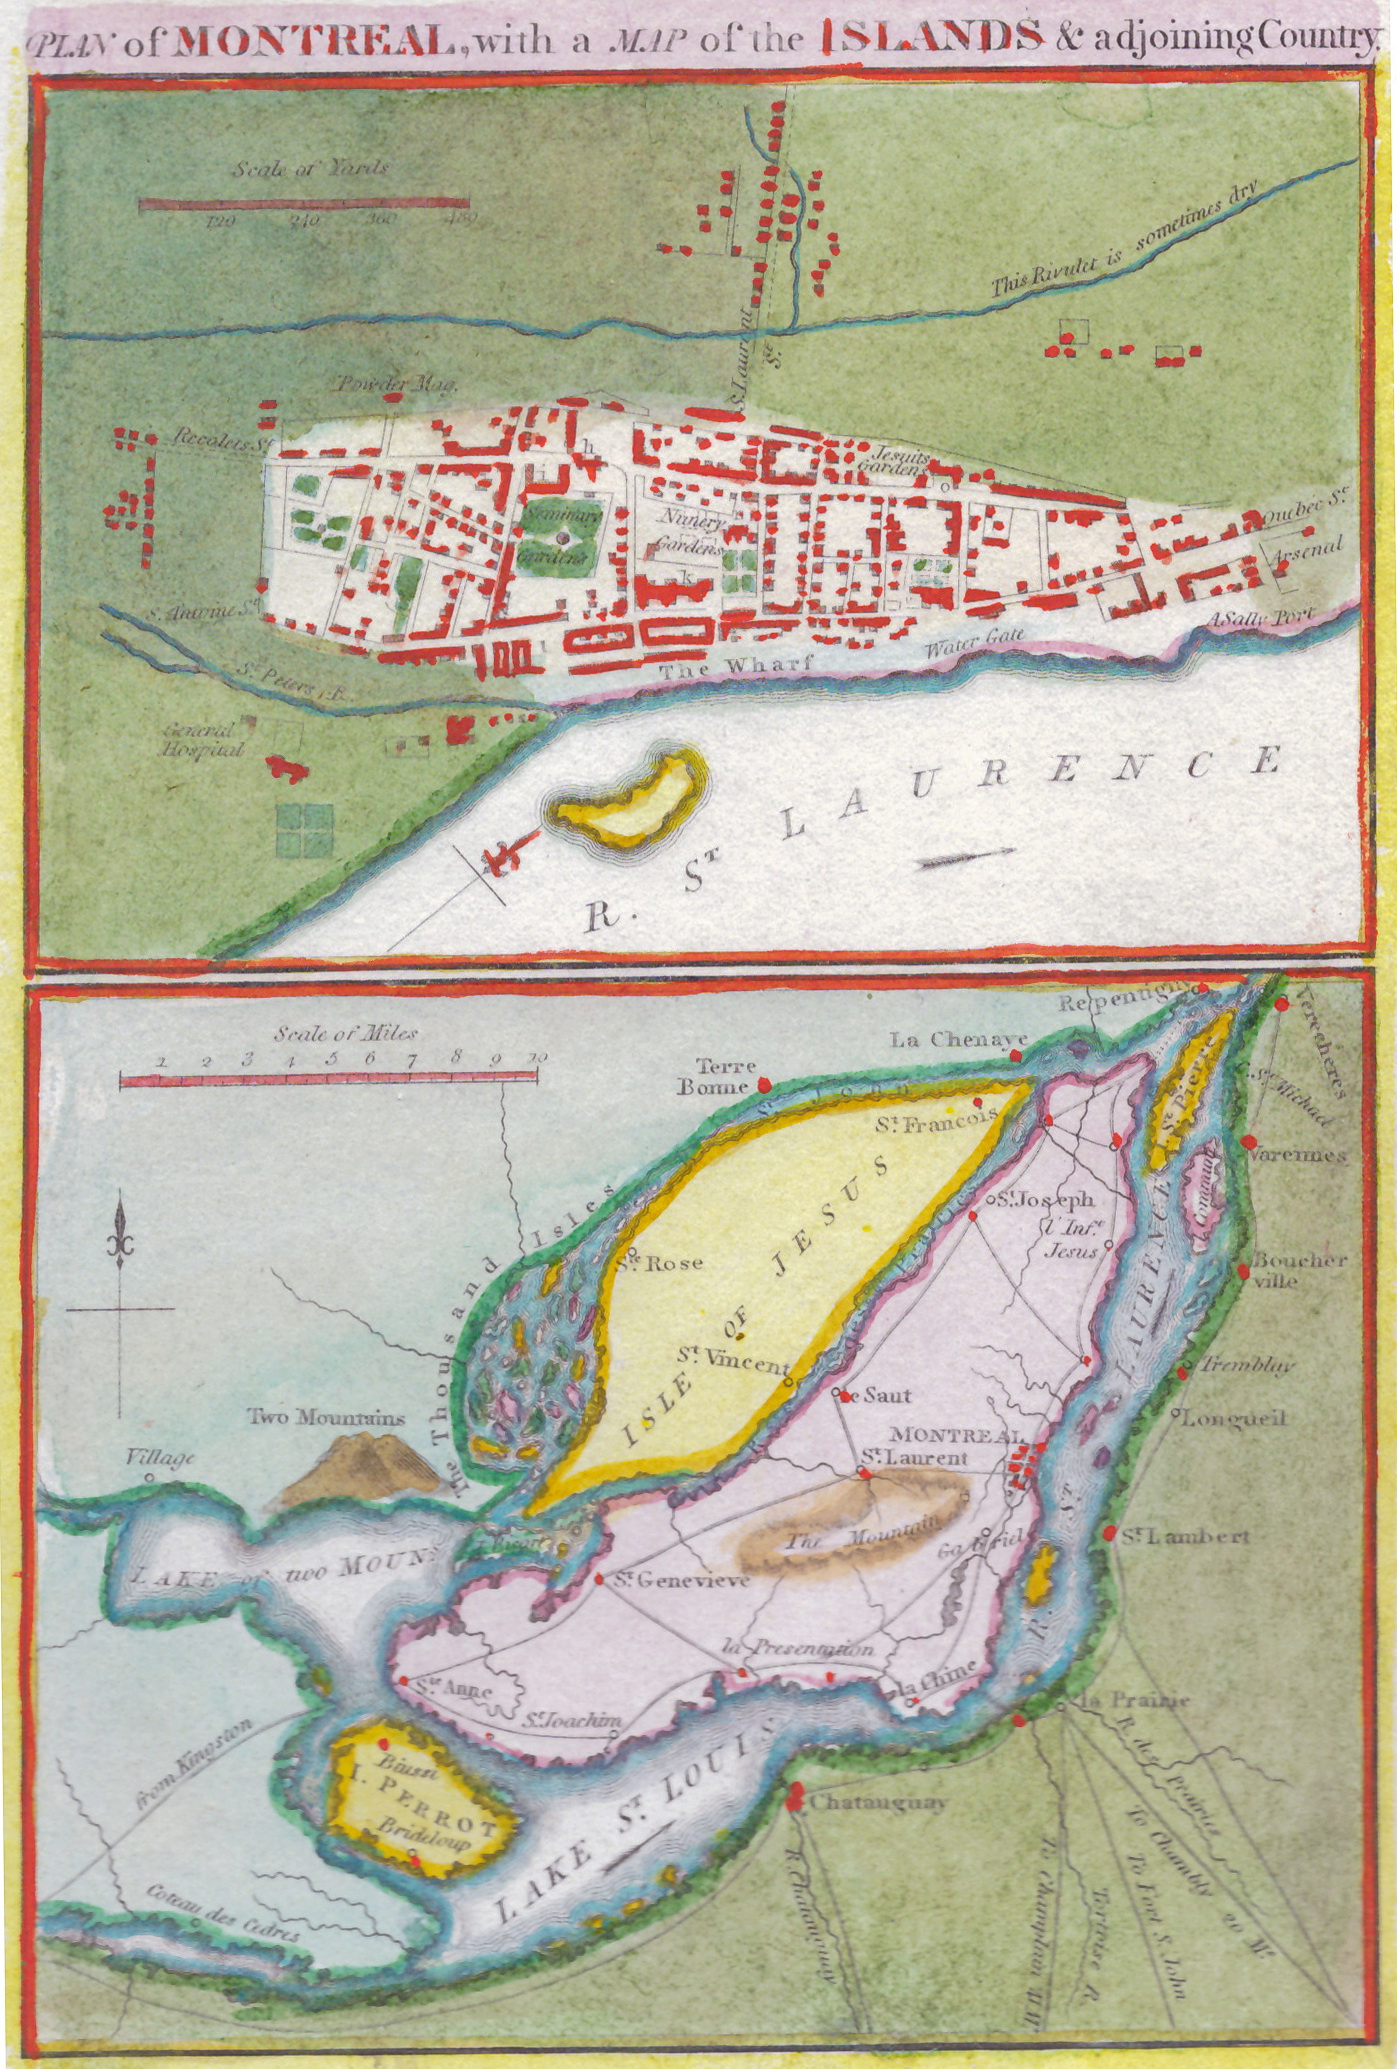 The 1815 map by John Melish is historical (not contemporary to the date published) and from a military atlas. It is interesting since it also shows the region around Montreal but the actual Old Montreal map dates from 1760. Photos courtesy of David Chandler and Stanley Sklar.